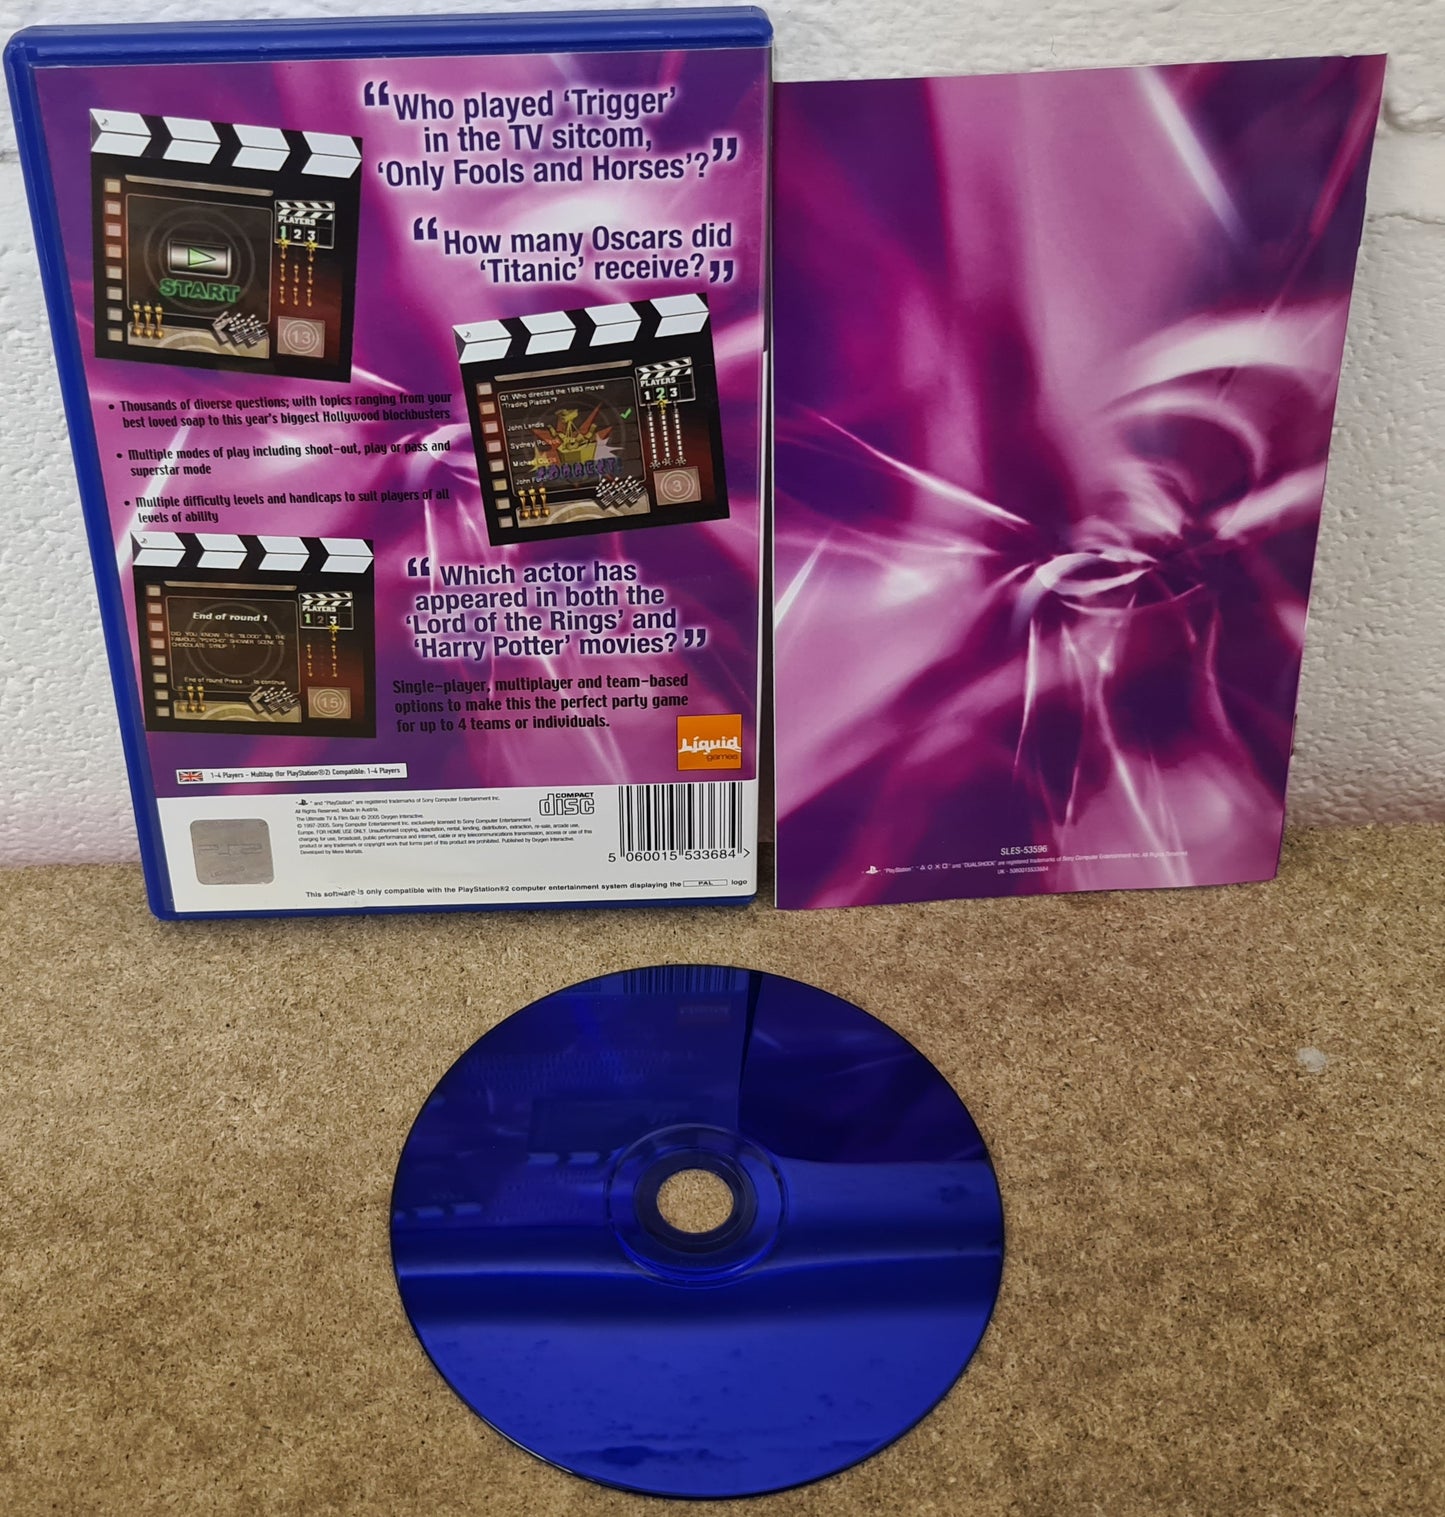 The Ultimate TV & Film Quiz Sony Playstation 2 (PS2) Game